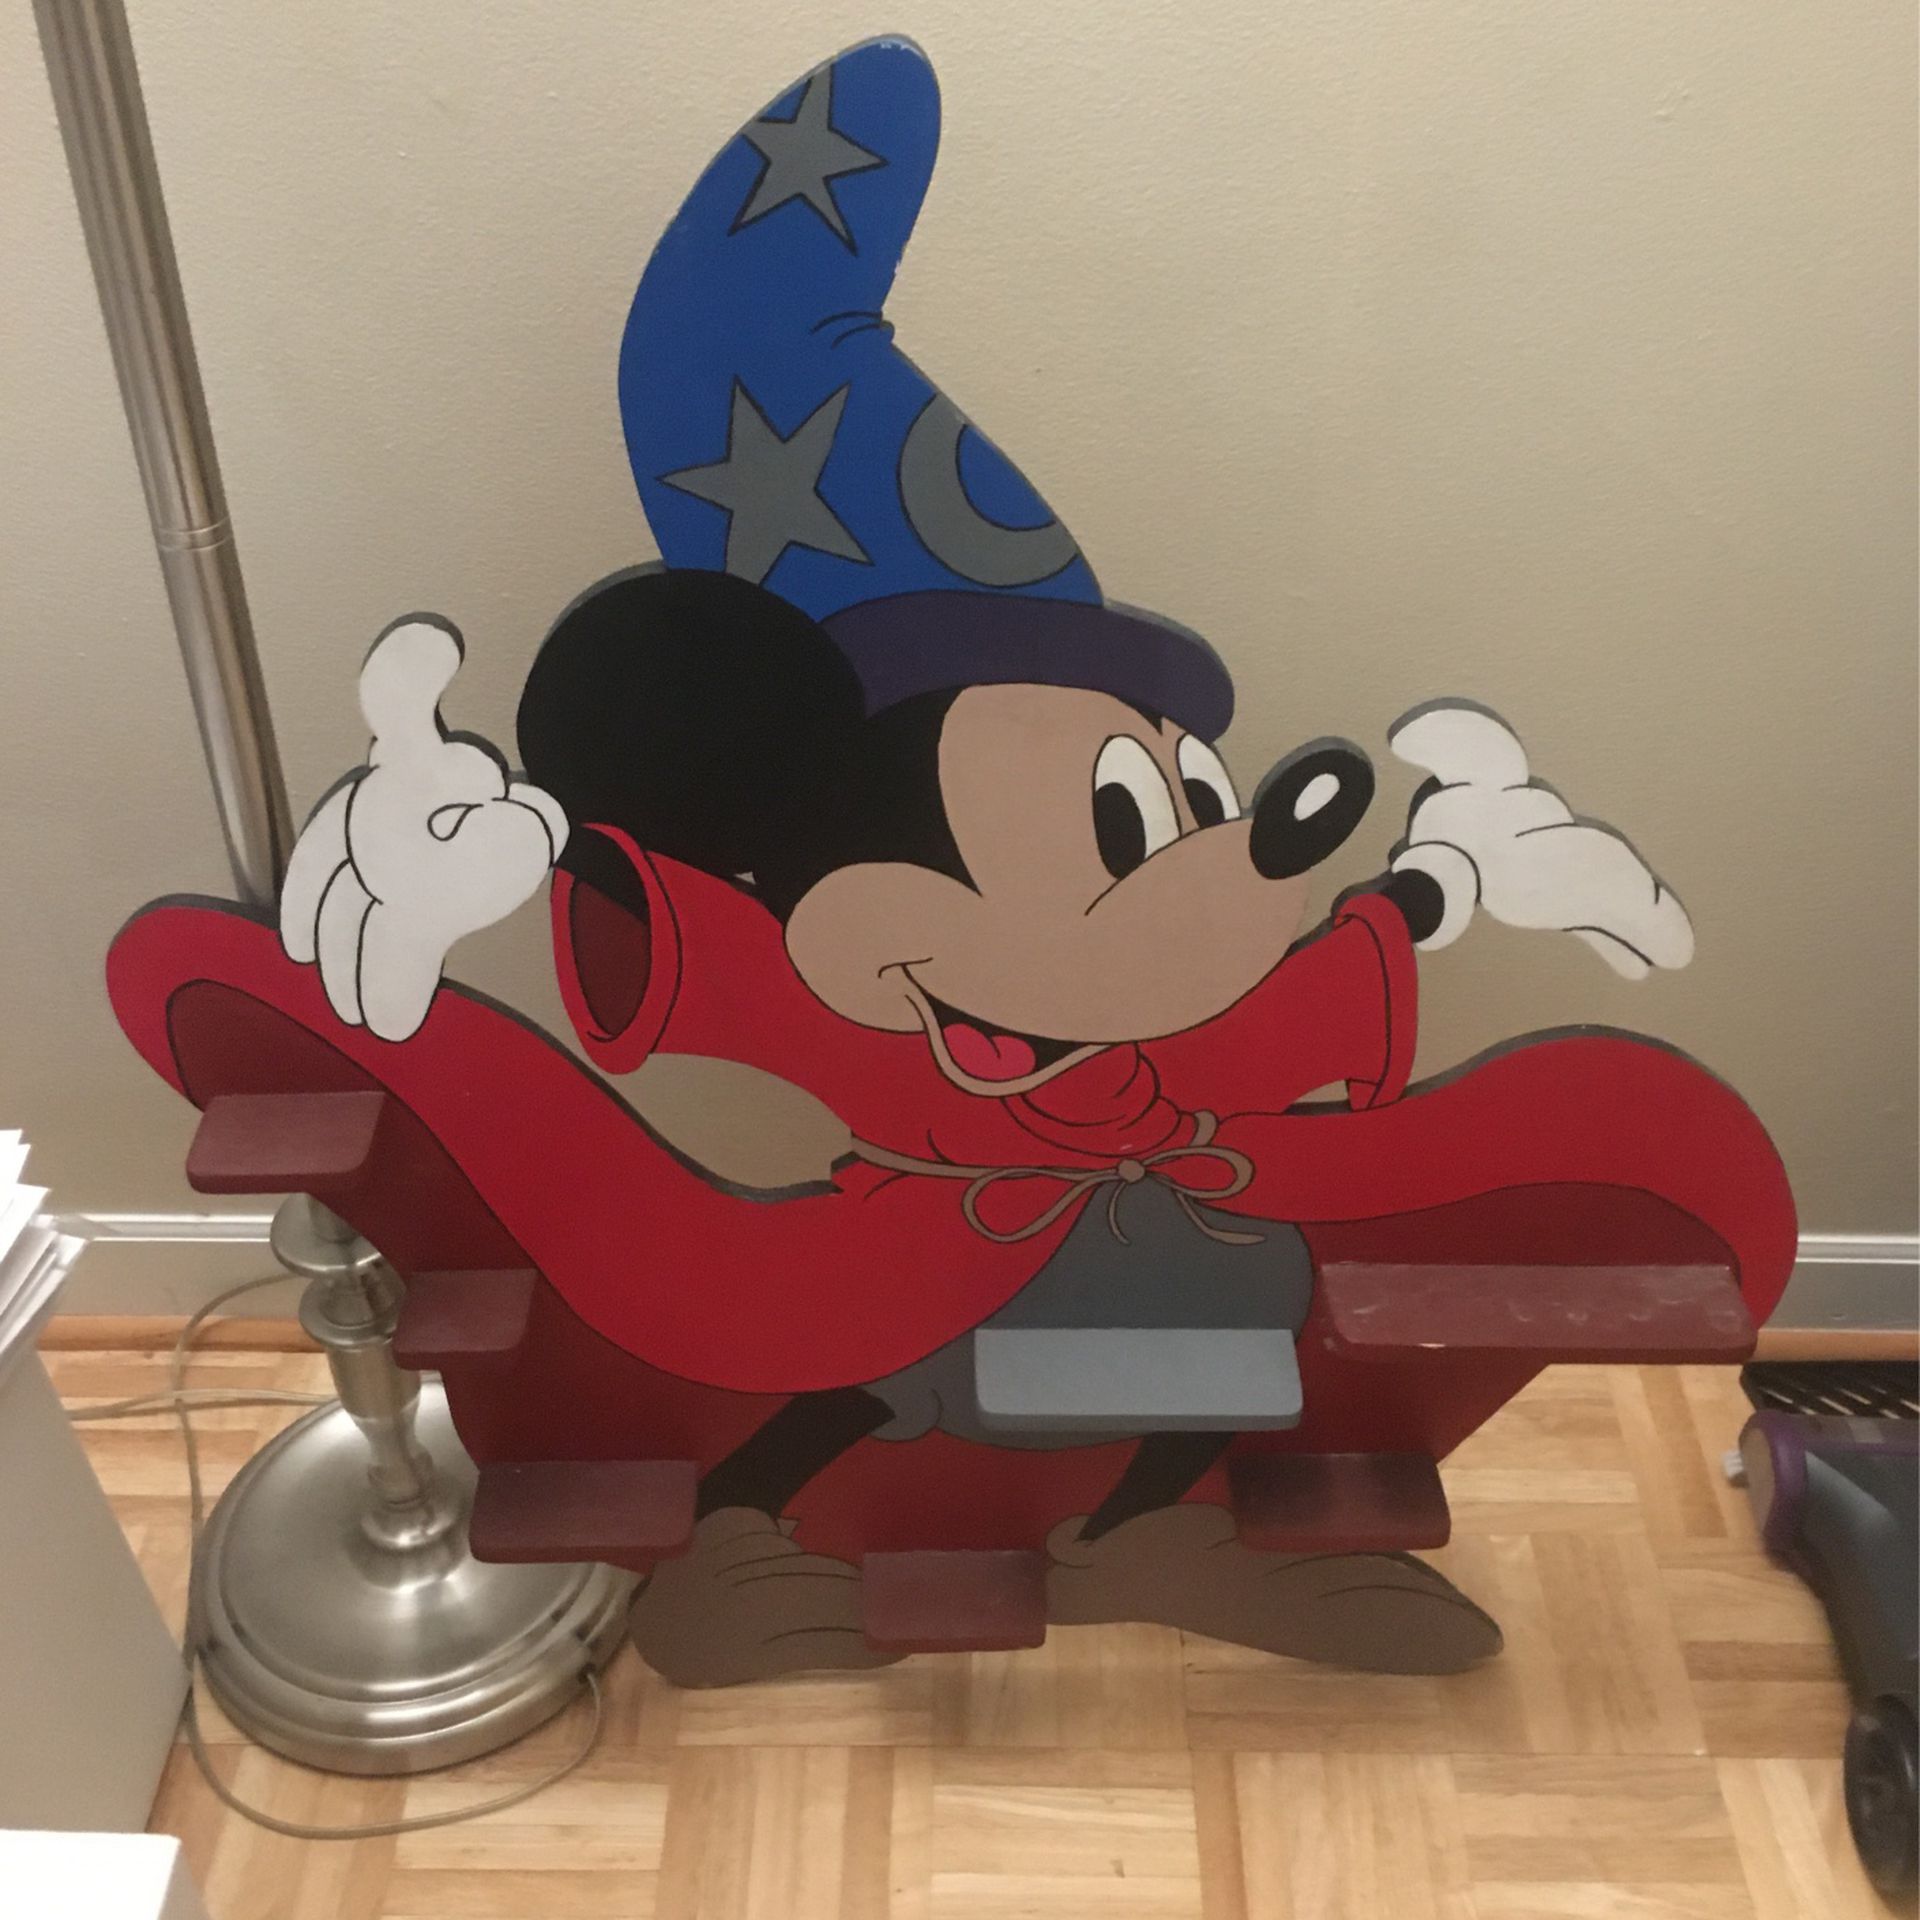 3’ Tall Mickey Mouse Shelf One-of-Kind